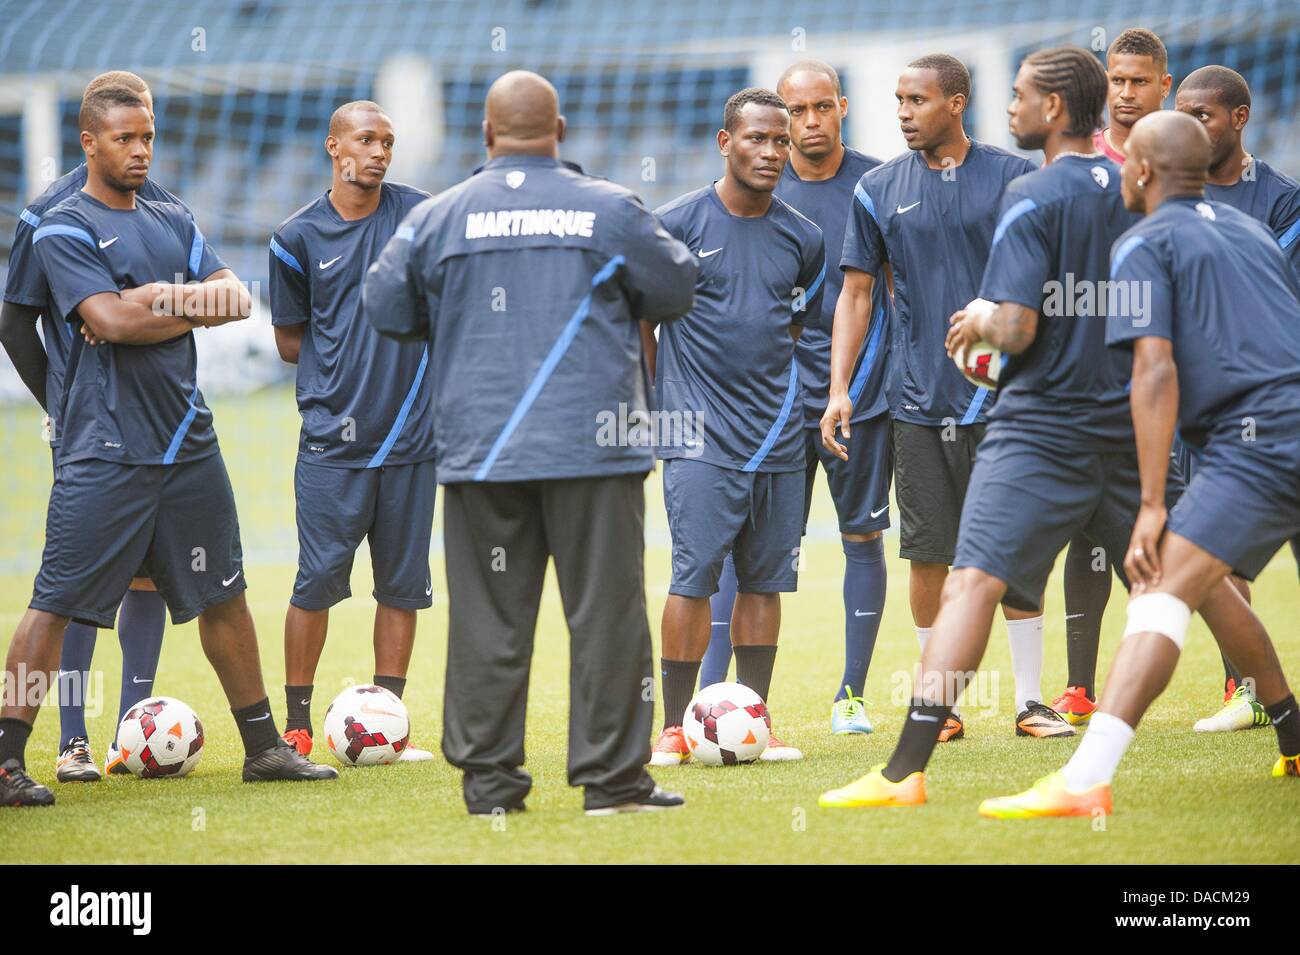 Seattle, Washington, USA. 10th July, 2013. Coach Patrick Cavelan, the National Team coach of Martinique talks with his men at a relaxed workout at Seattle's CenturyLink field readying for their upcoming Gold Cup match against Panama. Martinique is coming off a surprise win against the Canada National Team in CONCACAF play. Held every two years, the CONCACAF Gold Cup is the main association football competition of the men's national football teams governed by CONCACAF, determining the regional champion of North America, Central America, and the Caribbean. Stock Photo